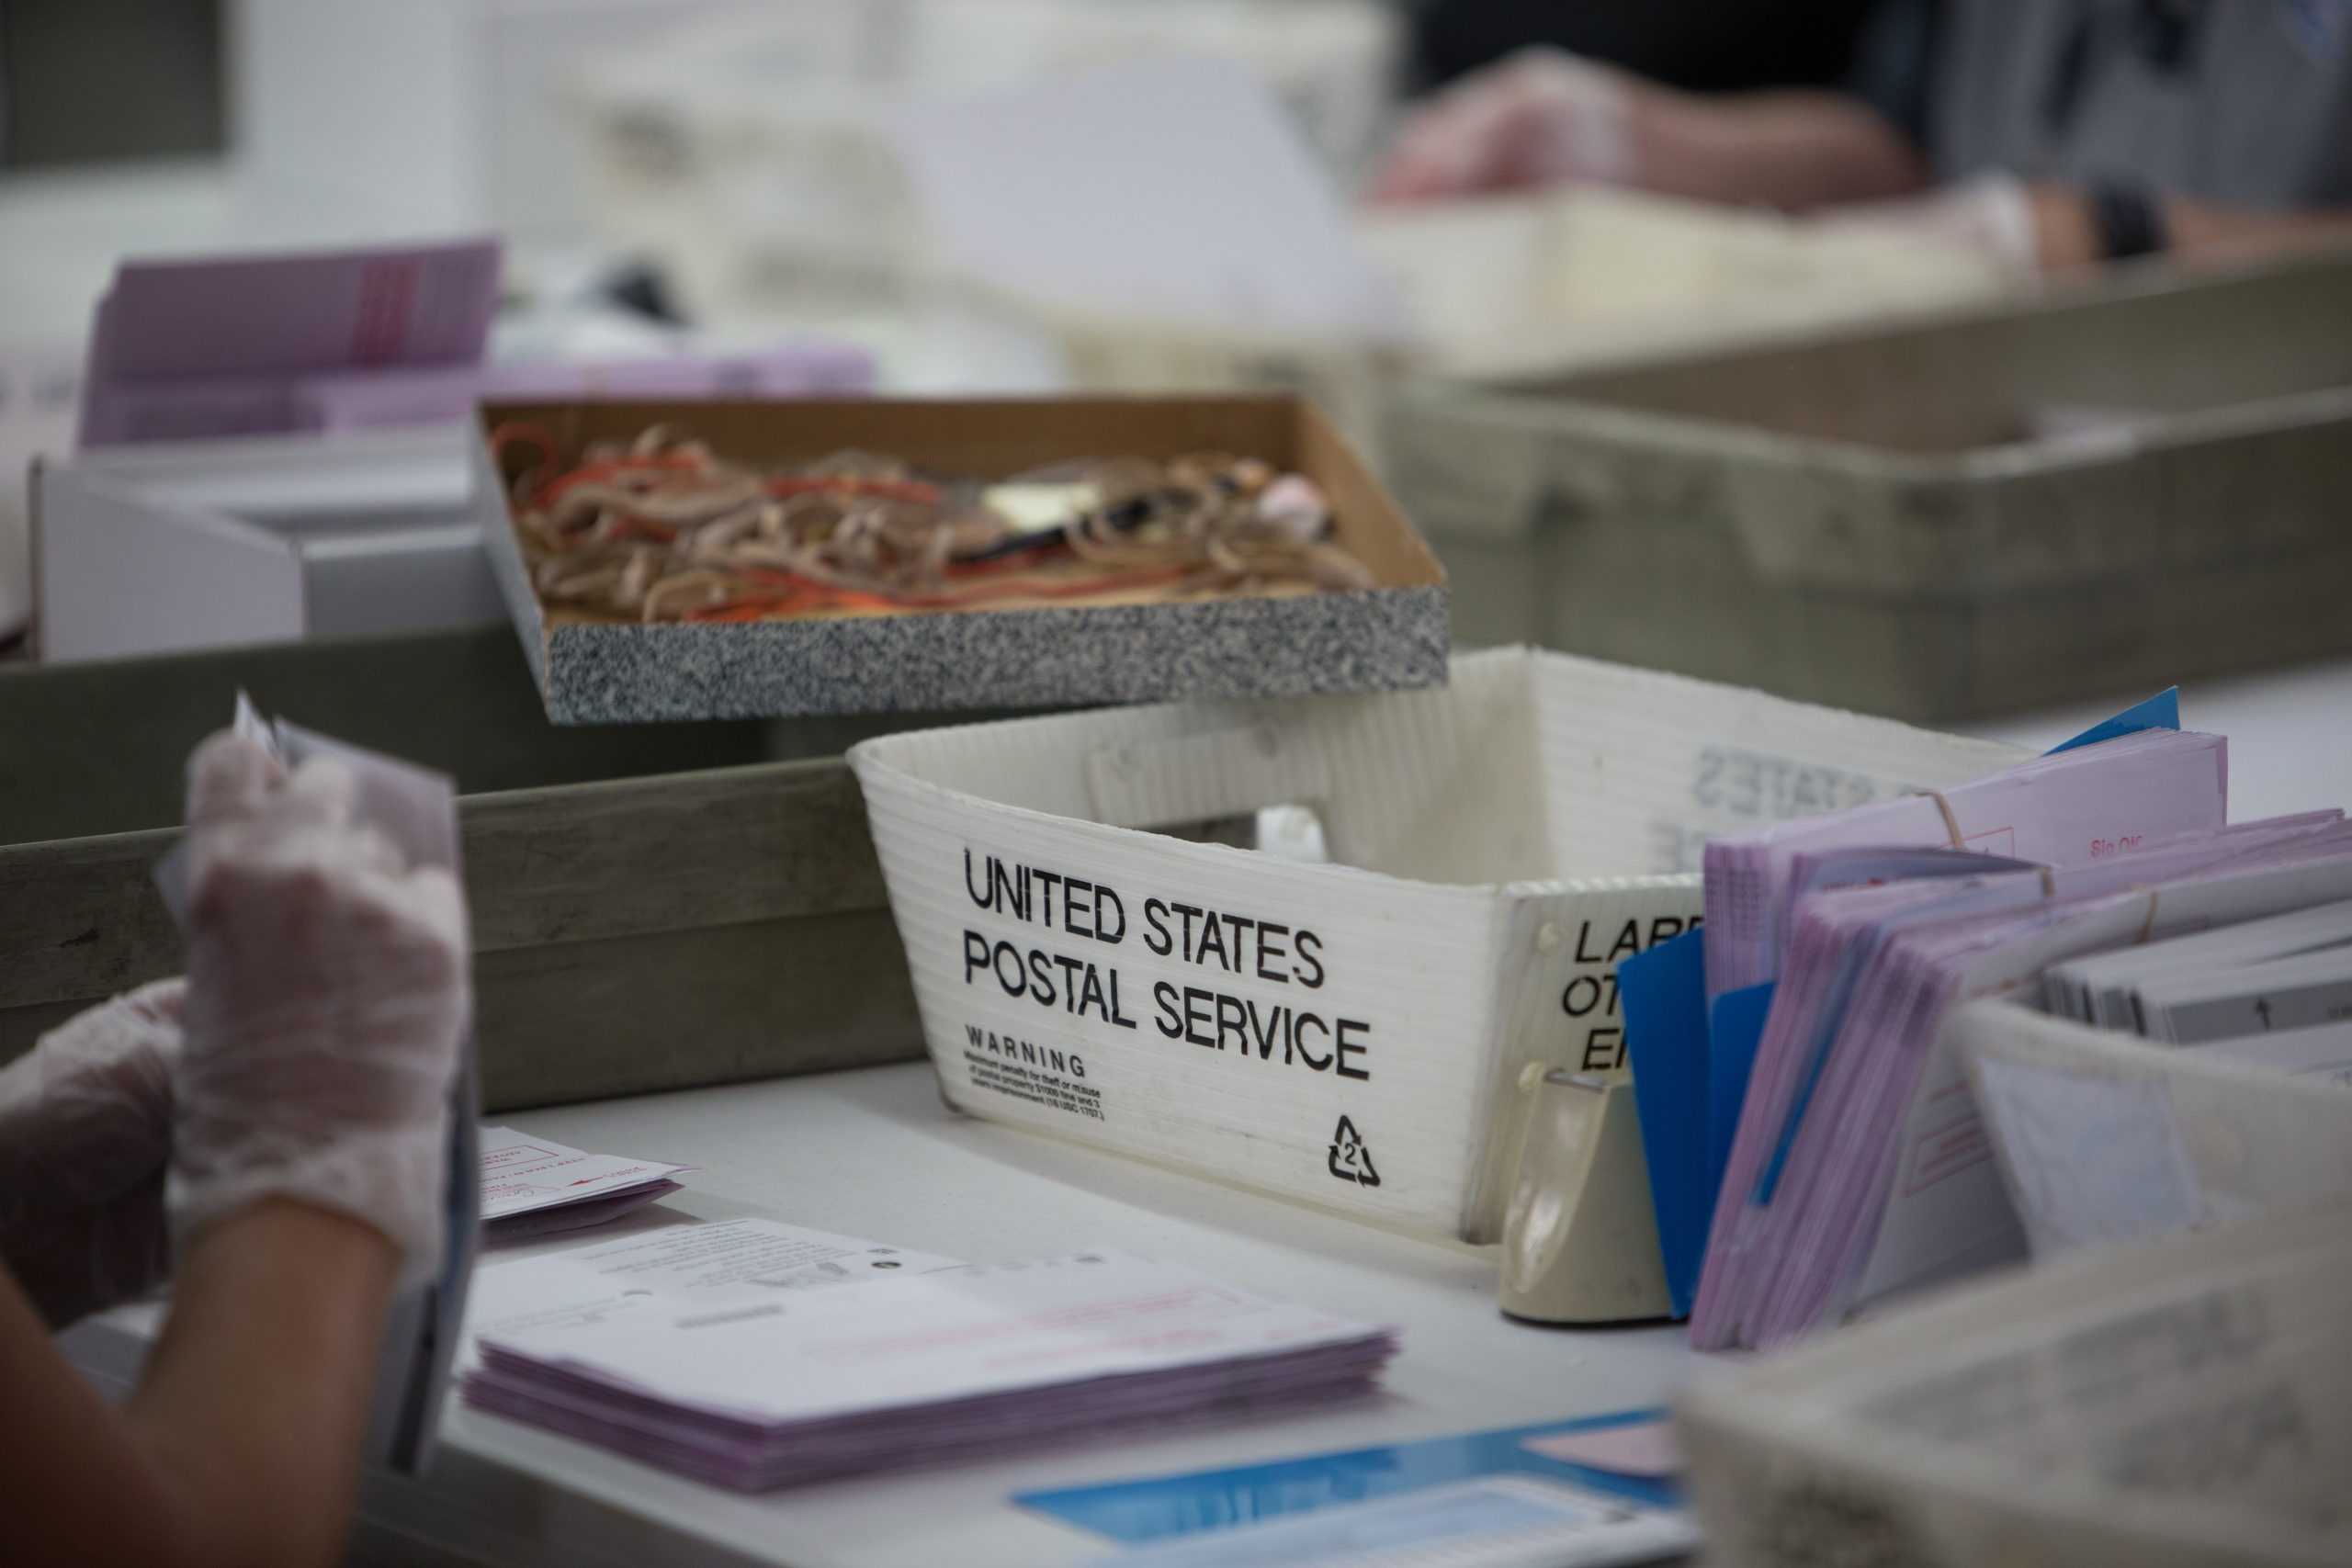 NAACP v. USPS: Important Facts About LDF’s Case Against the United States Postal Service and the 2020 Elections